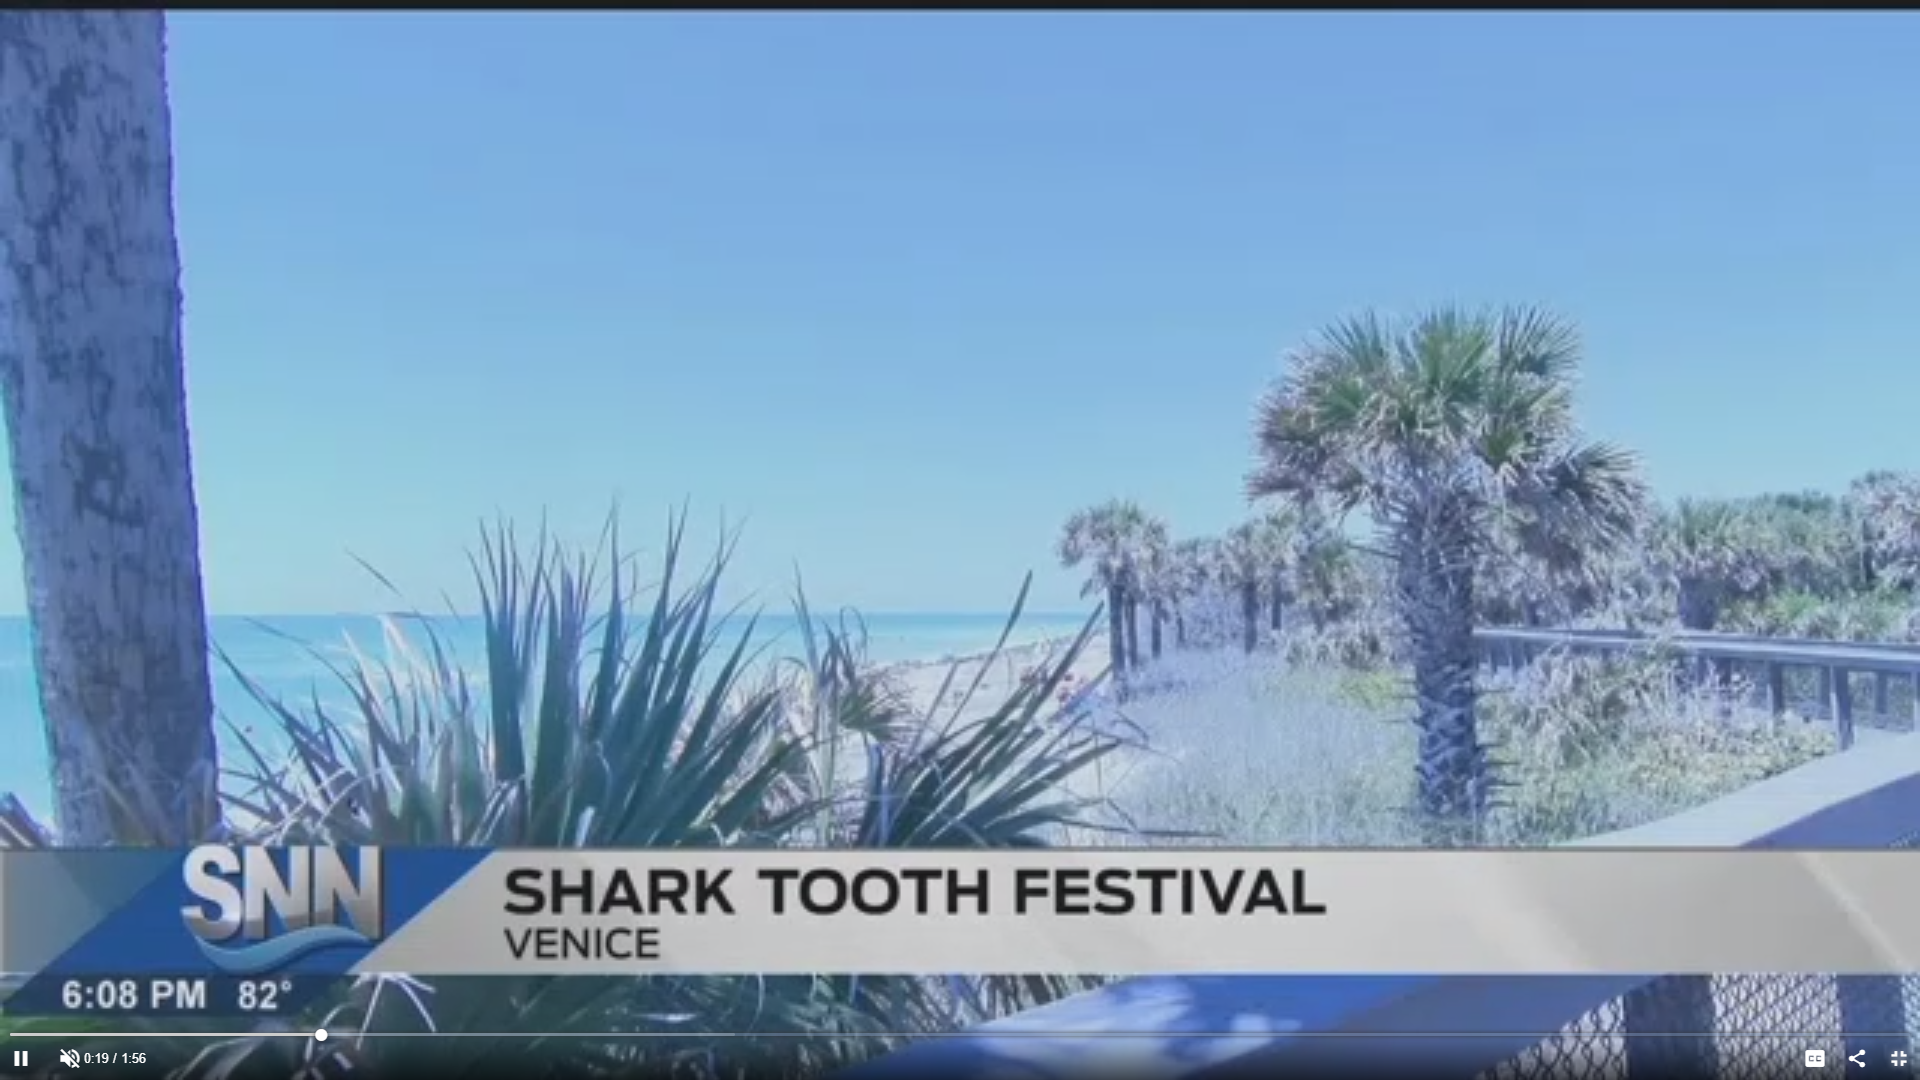 The Venice Sharks Tooth Festival is This Weekend The Suncoast News